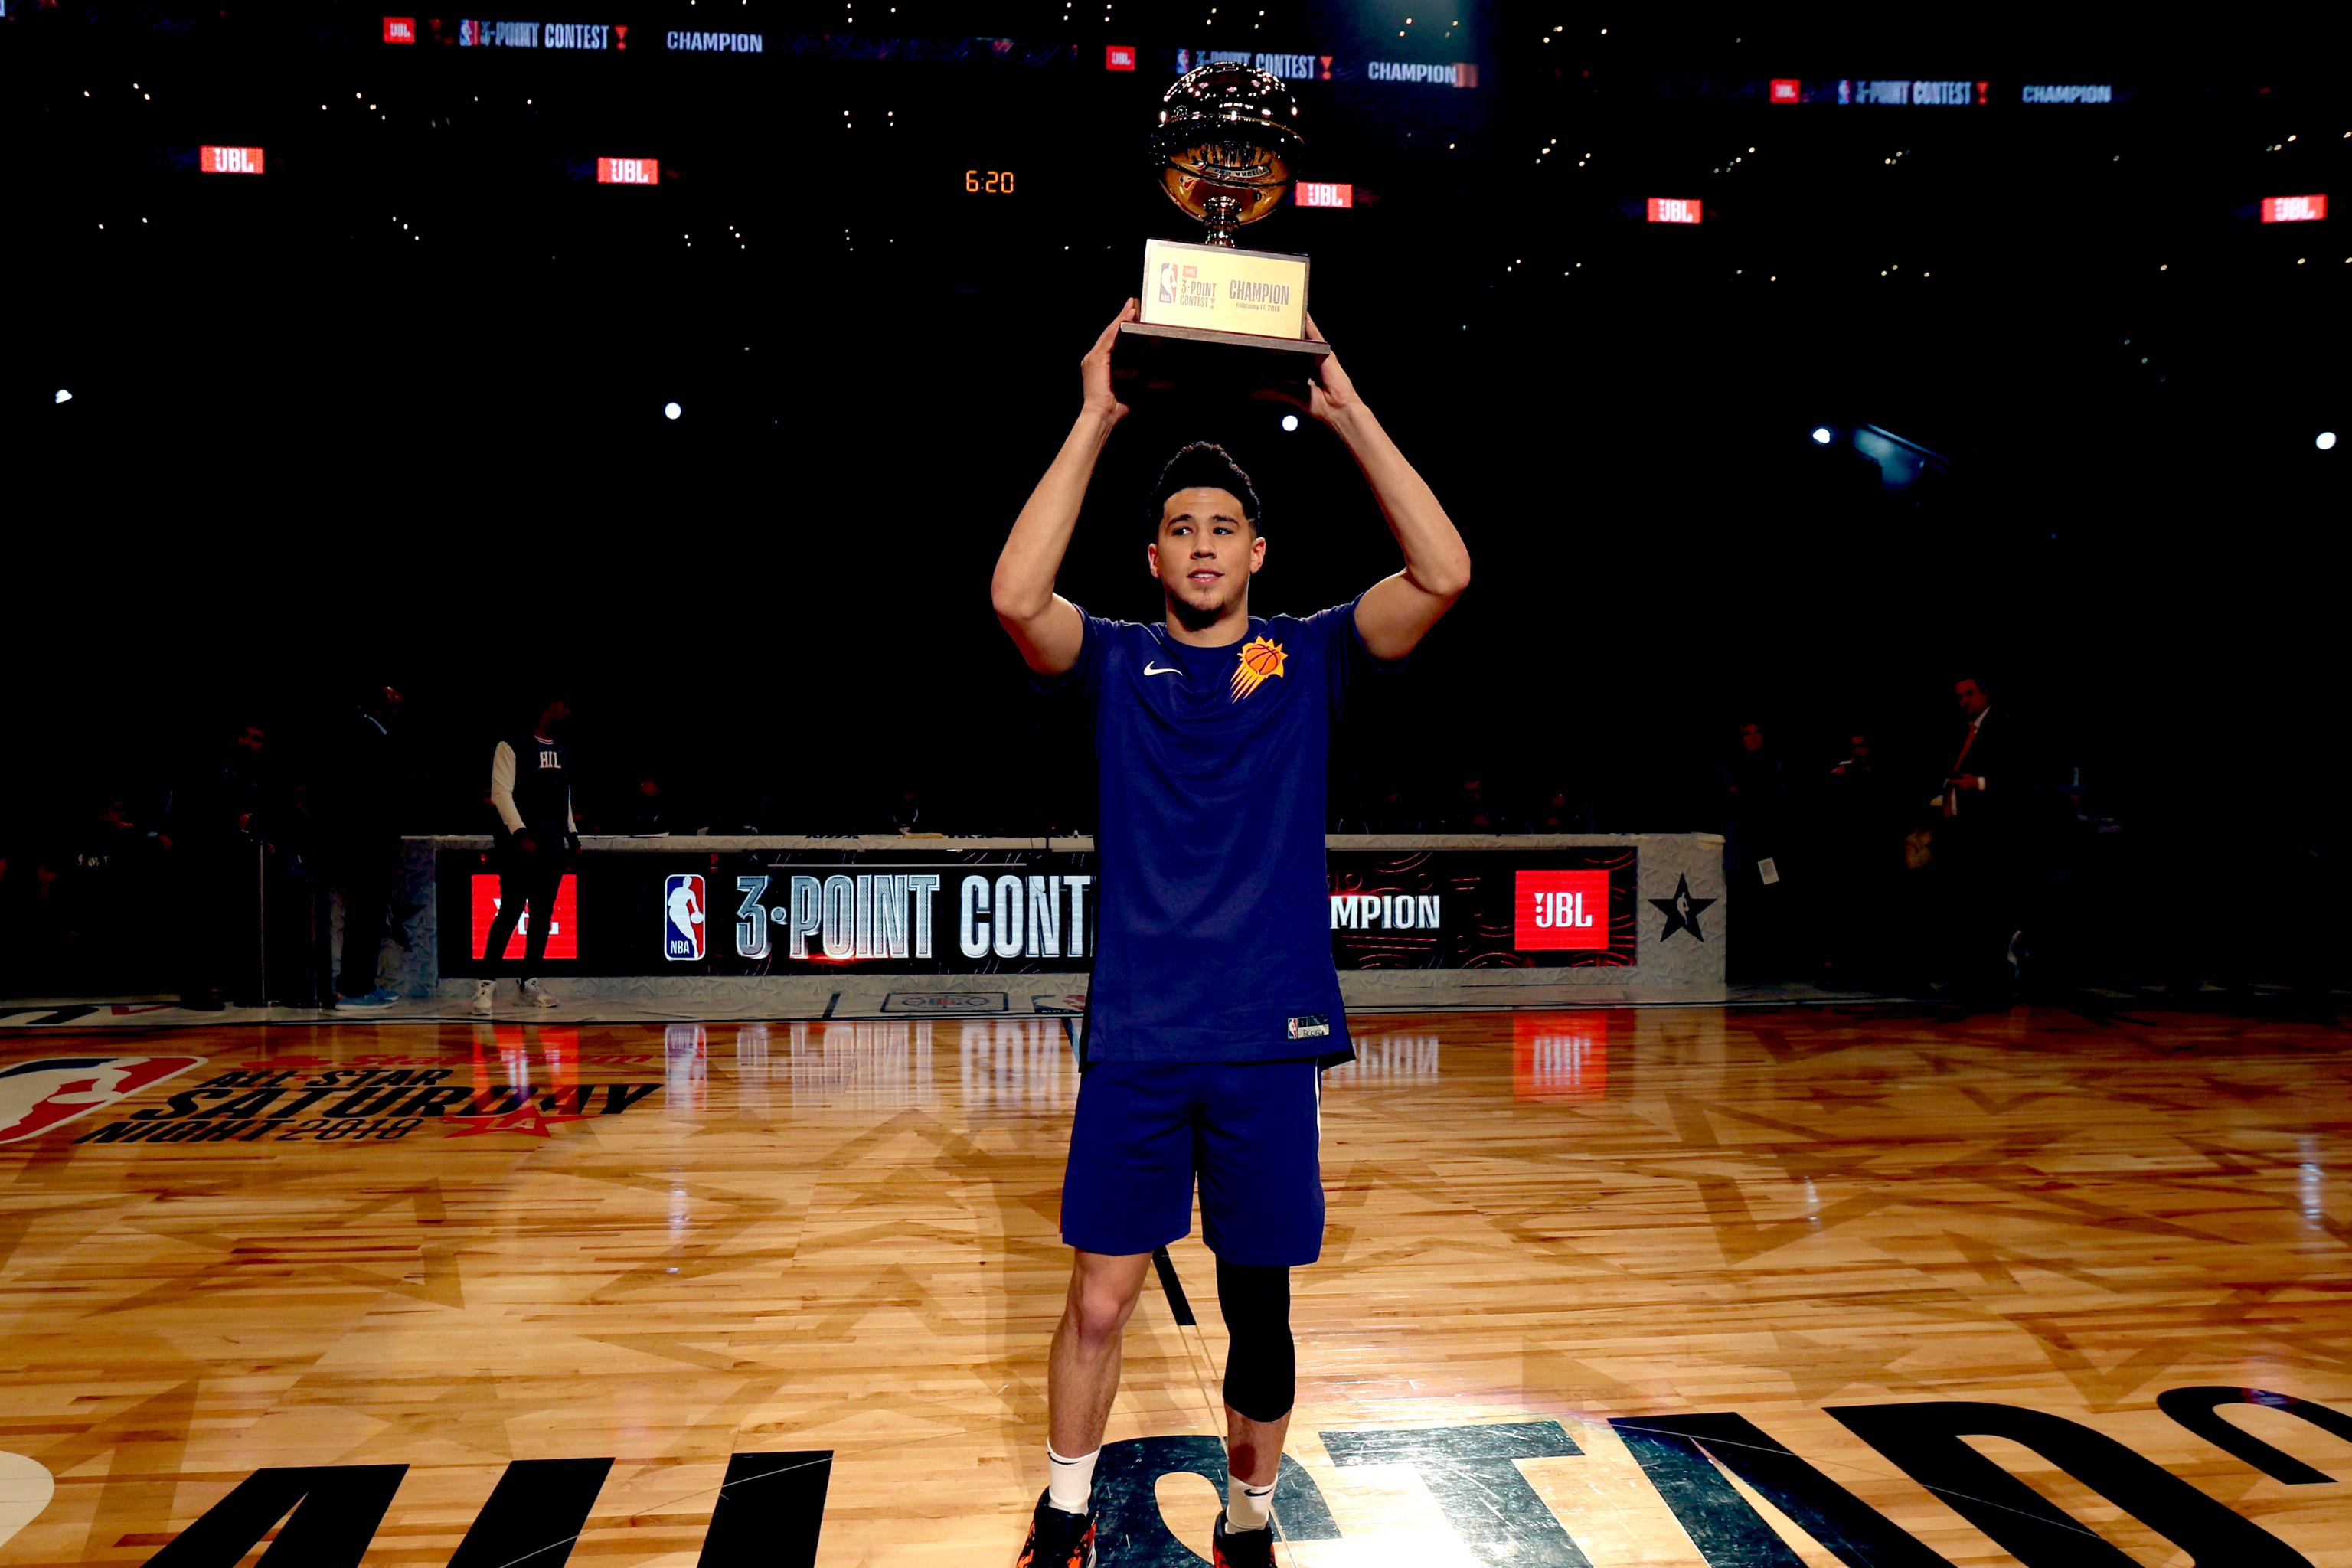 Devin Booker Sets NBA 3Point Contest Record with 28 Points in Final Round